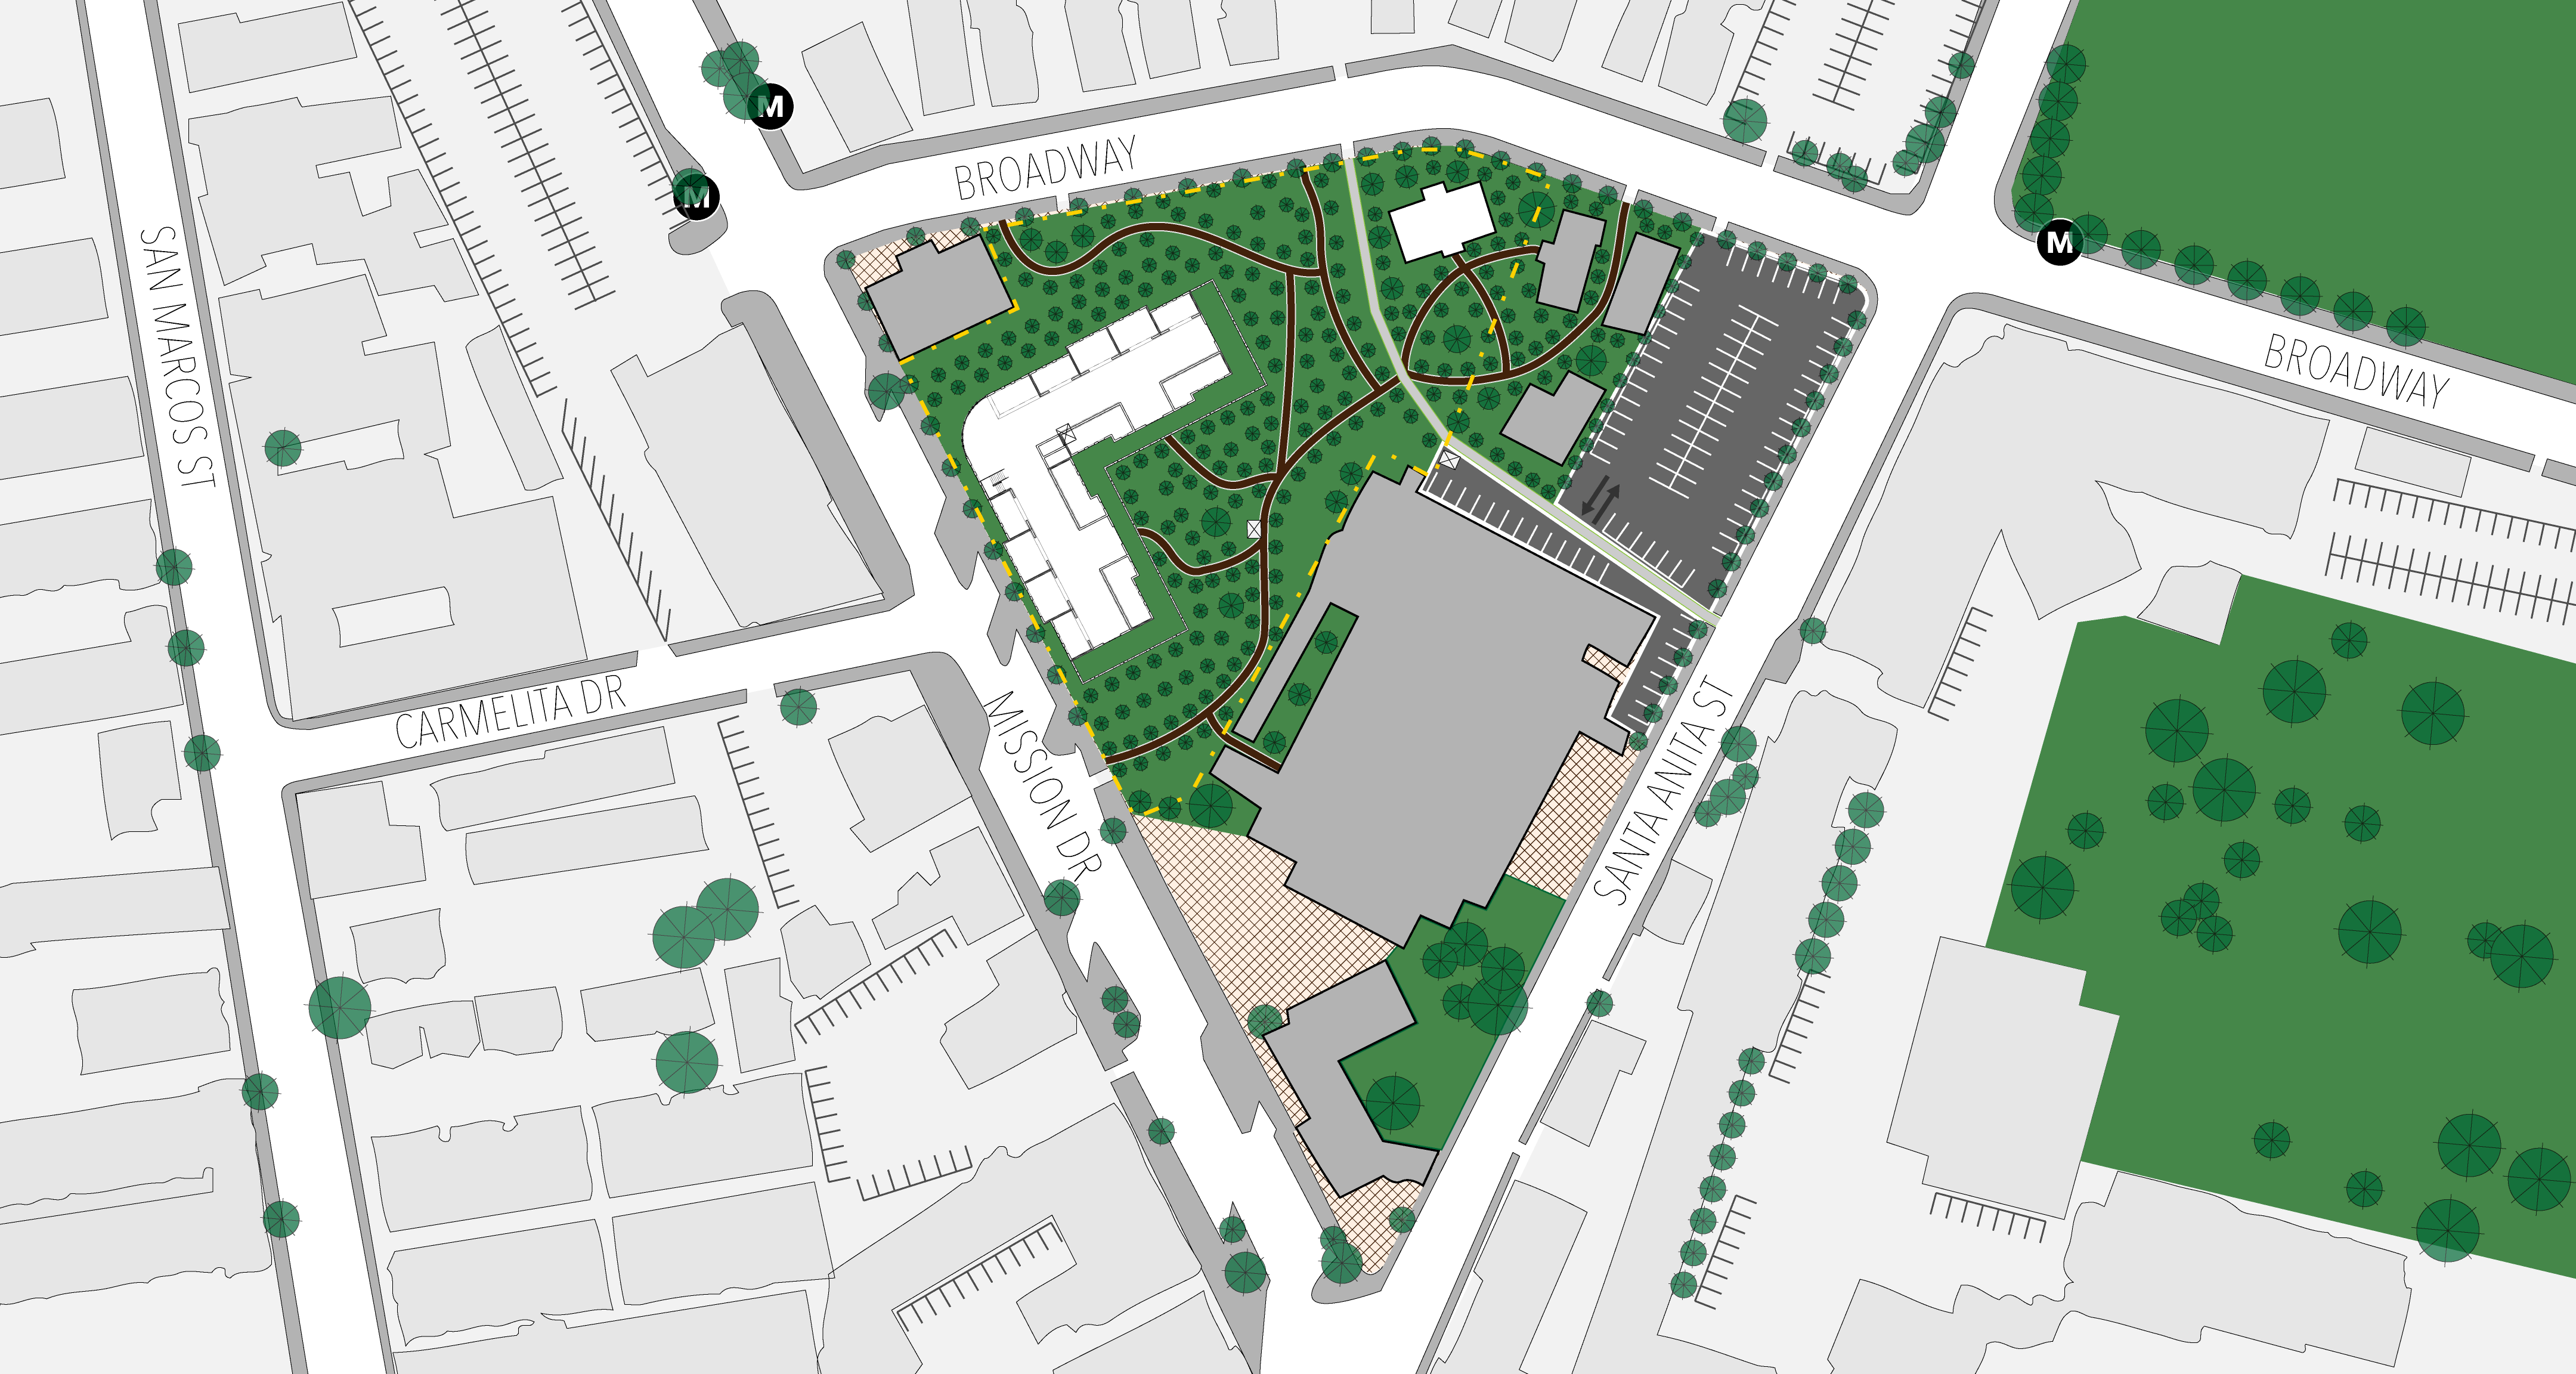 Site plan of the project